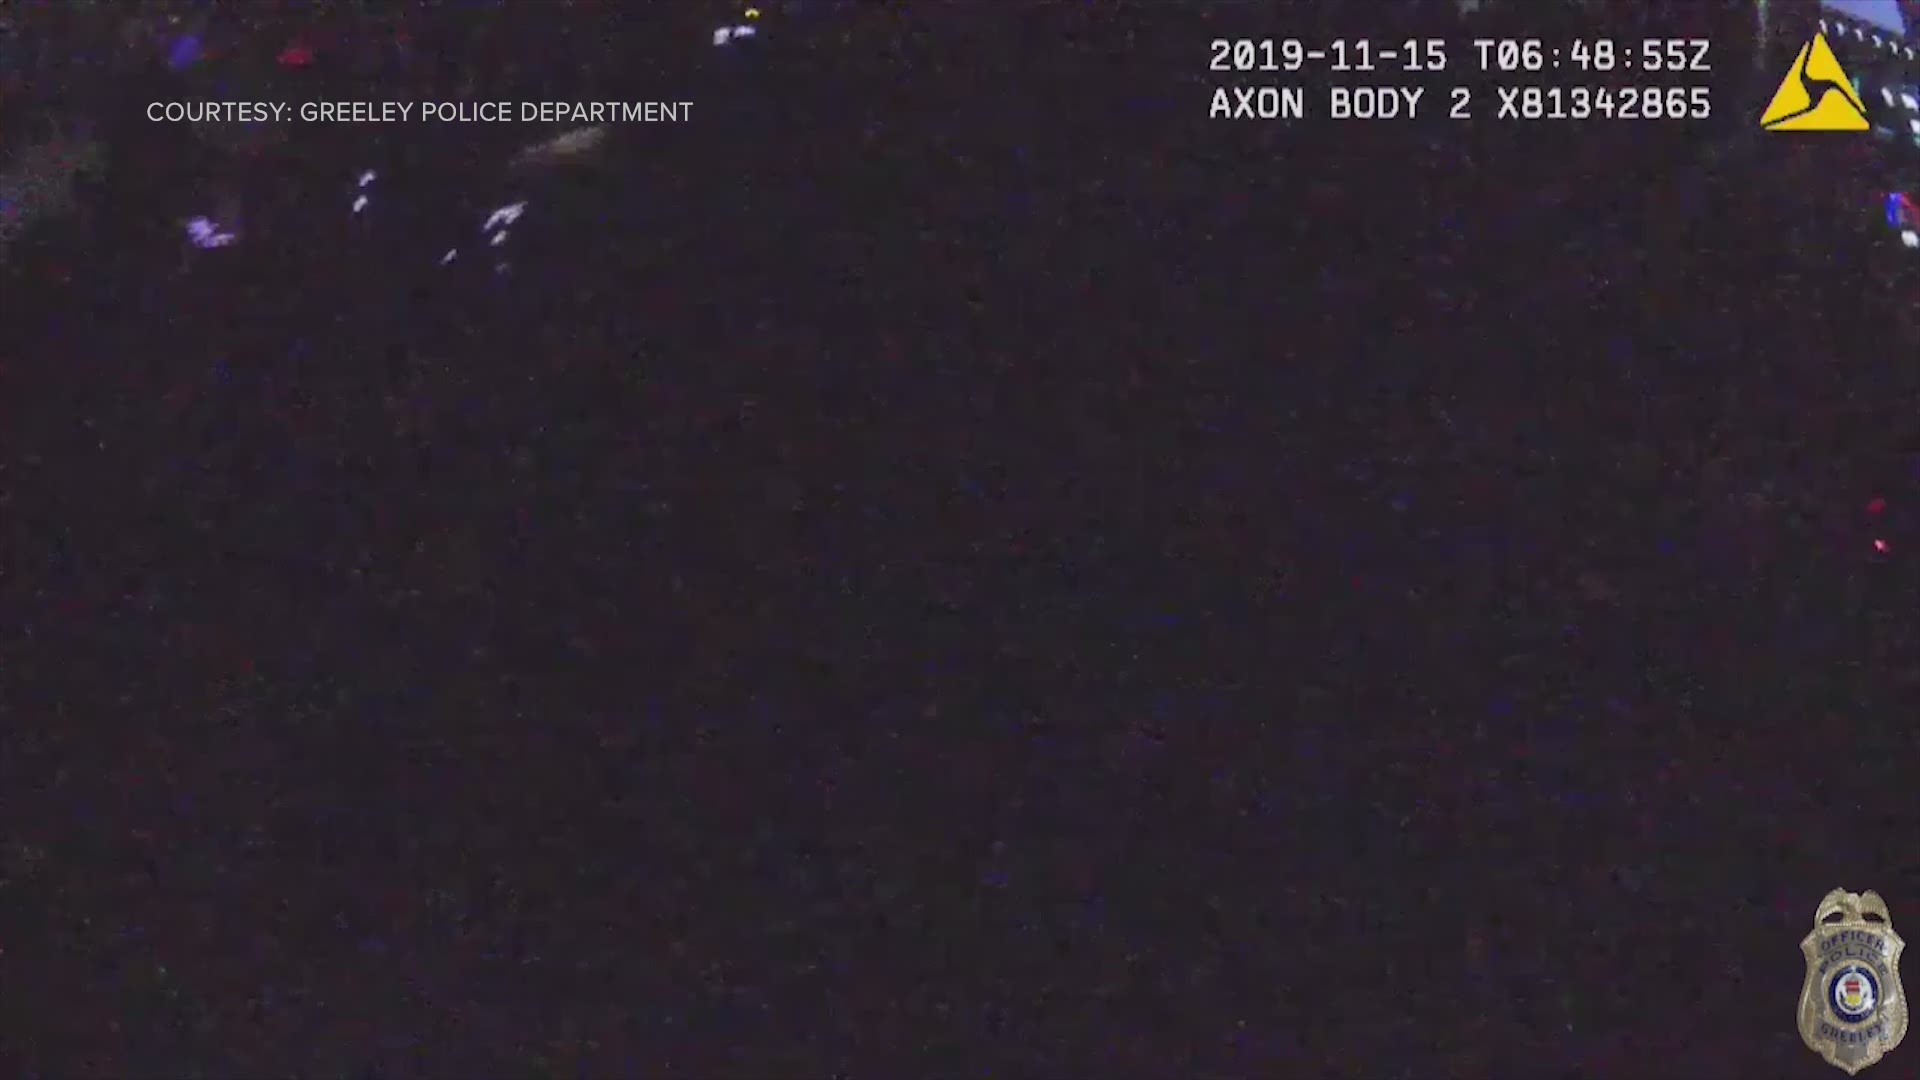 Greeley police explain bodycam video that shows a shootout between an officer and two car chase suspects. (Editor's note: This video contains graphic content.)